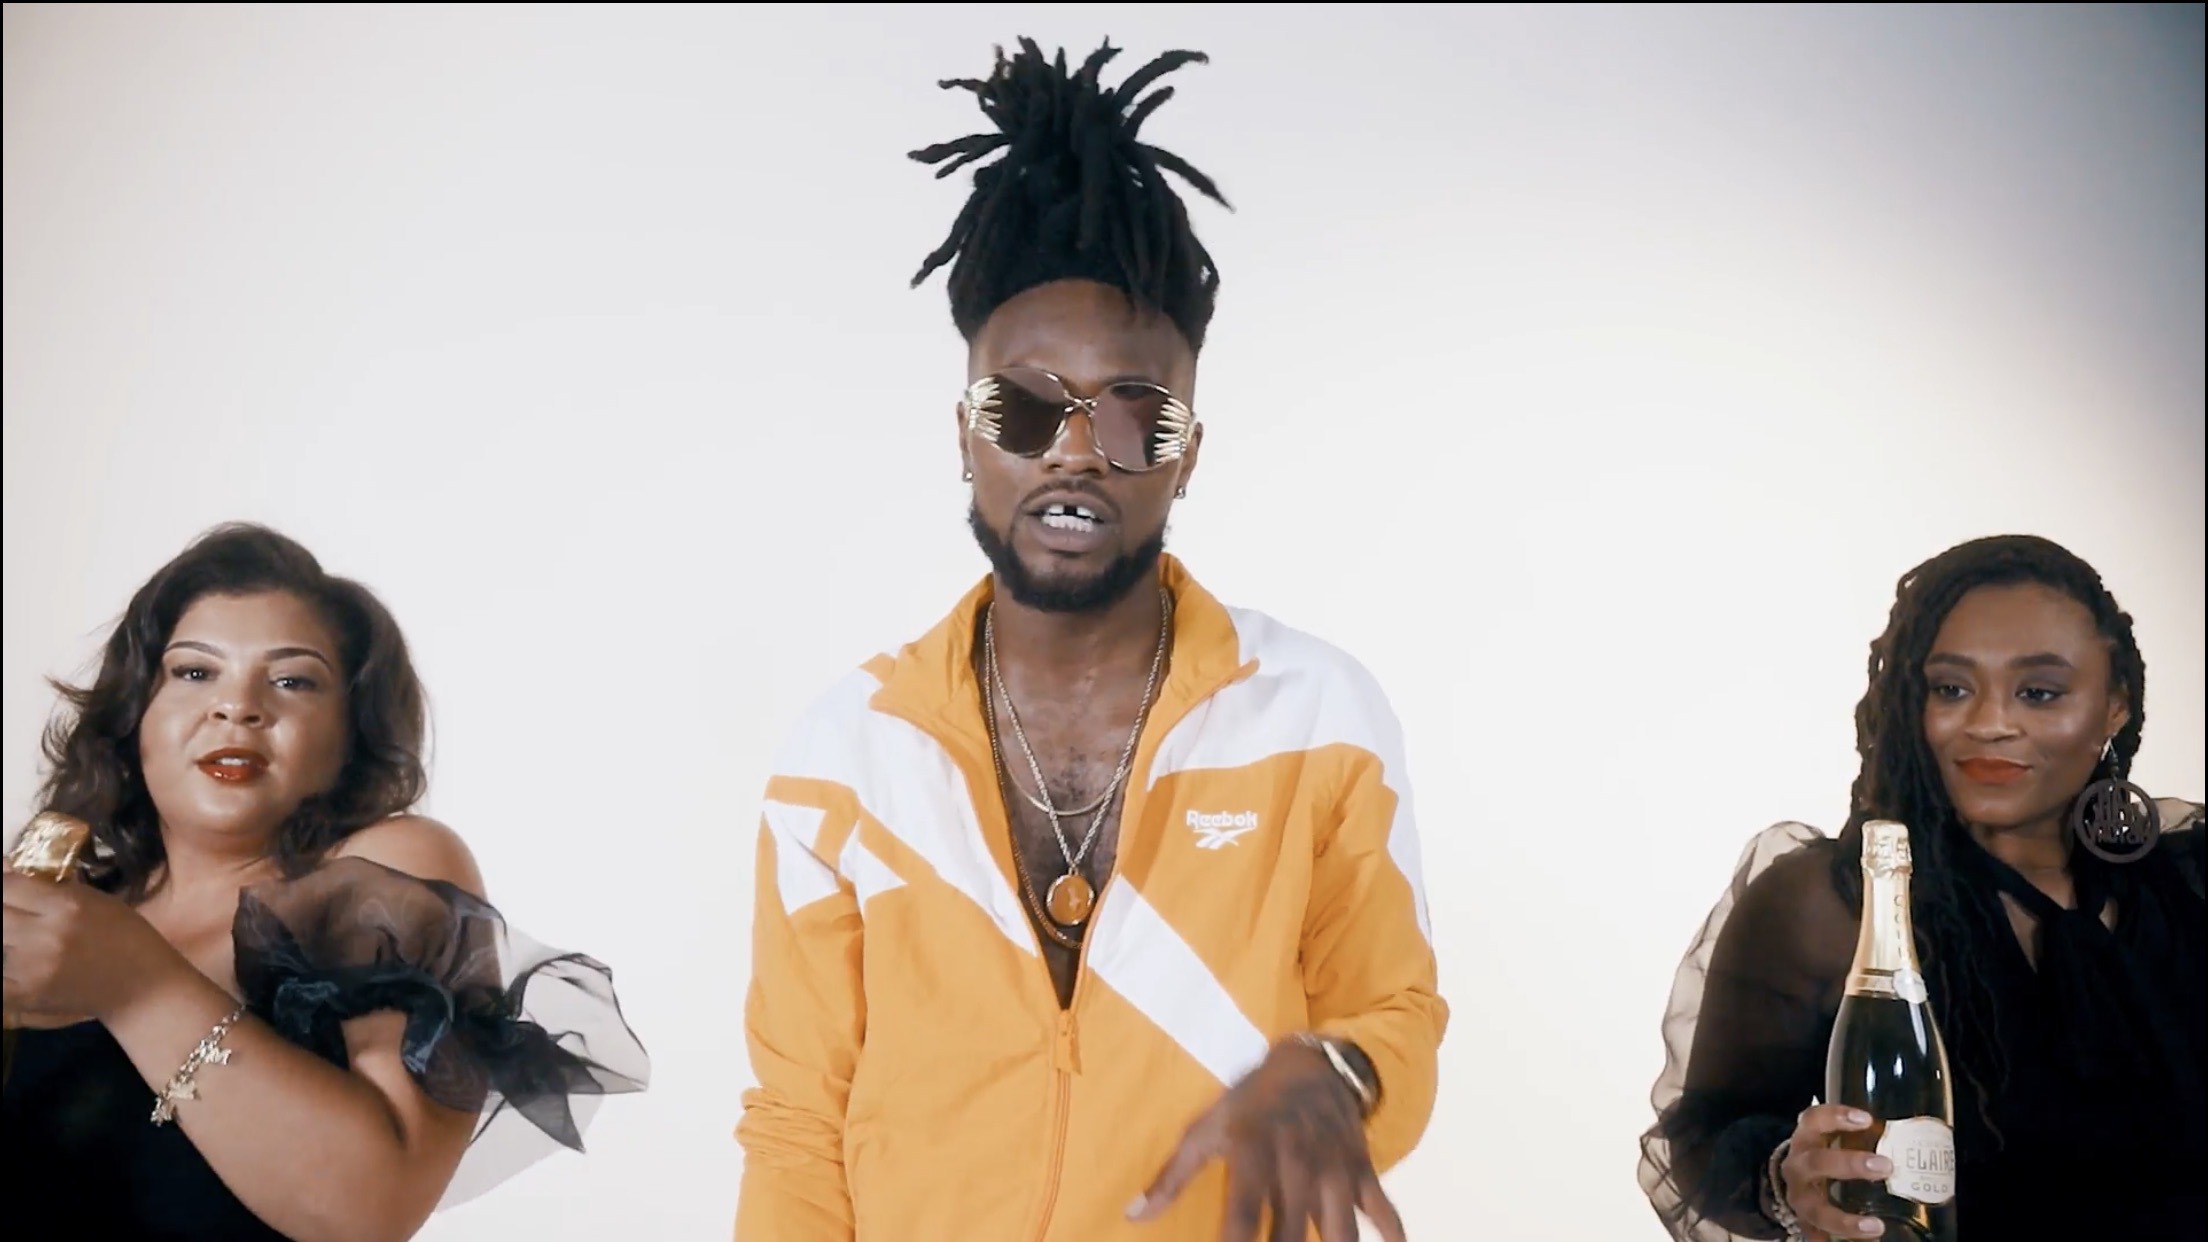 NC Madison Jay Rolling with the “G’z” in New Visual @Themadisonjay